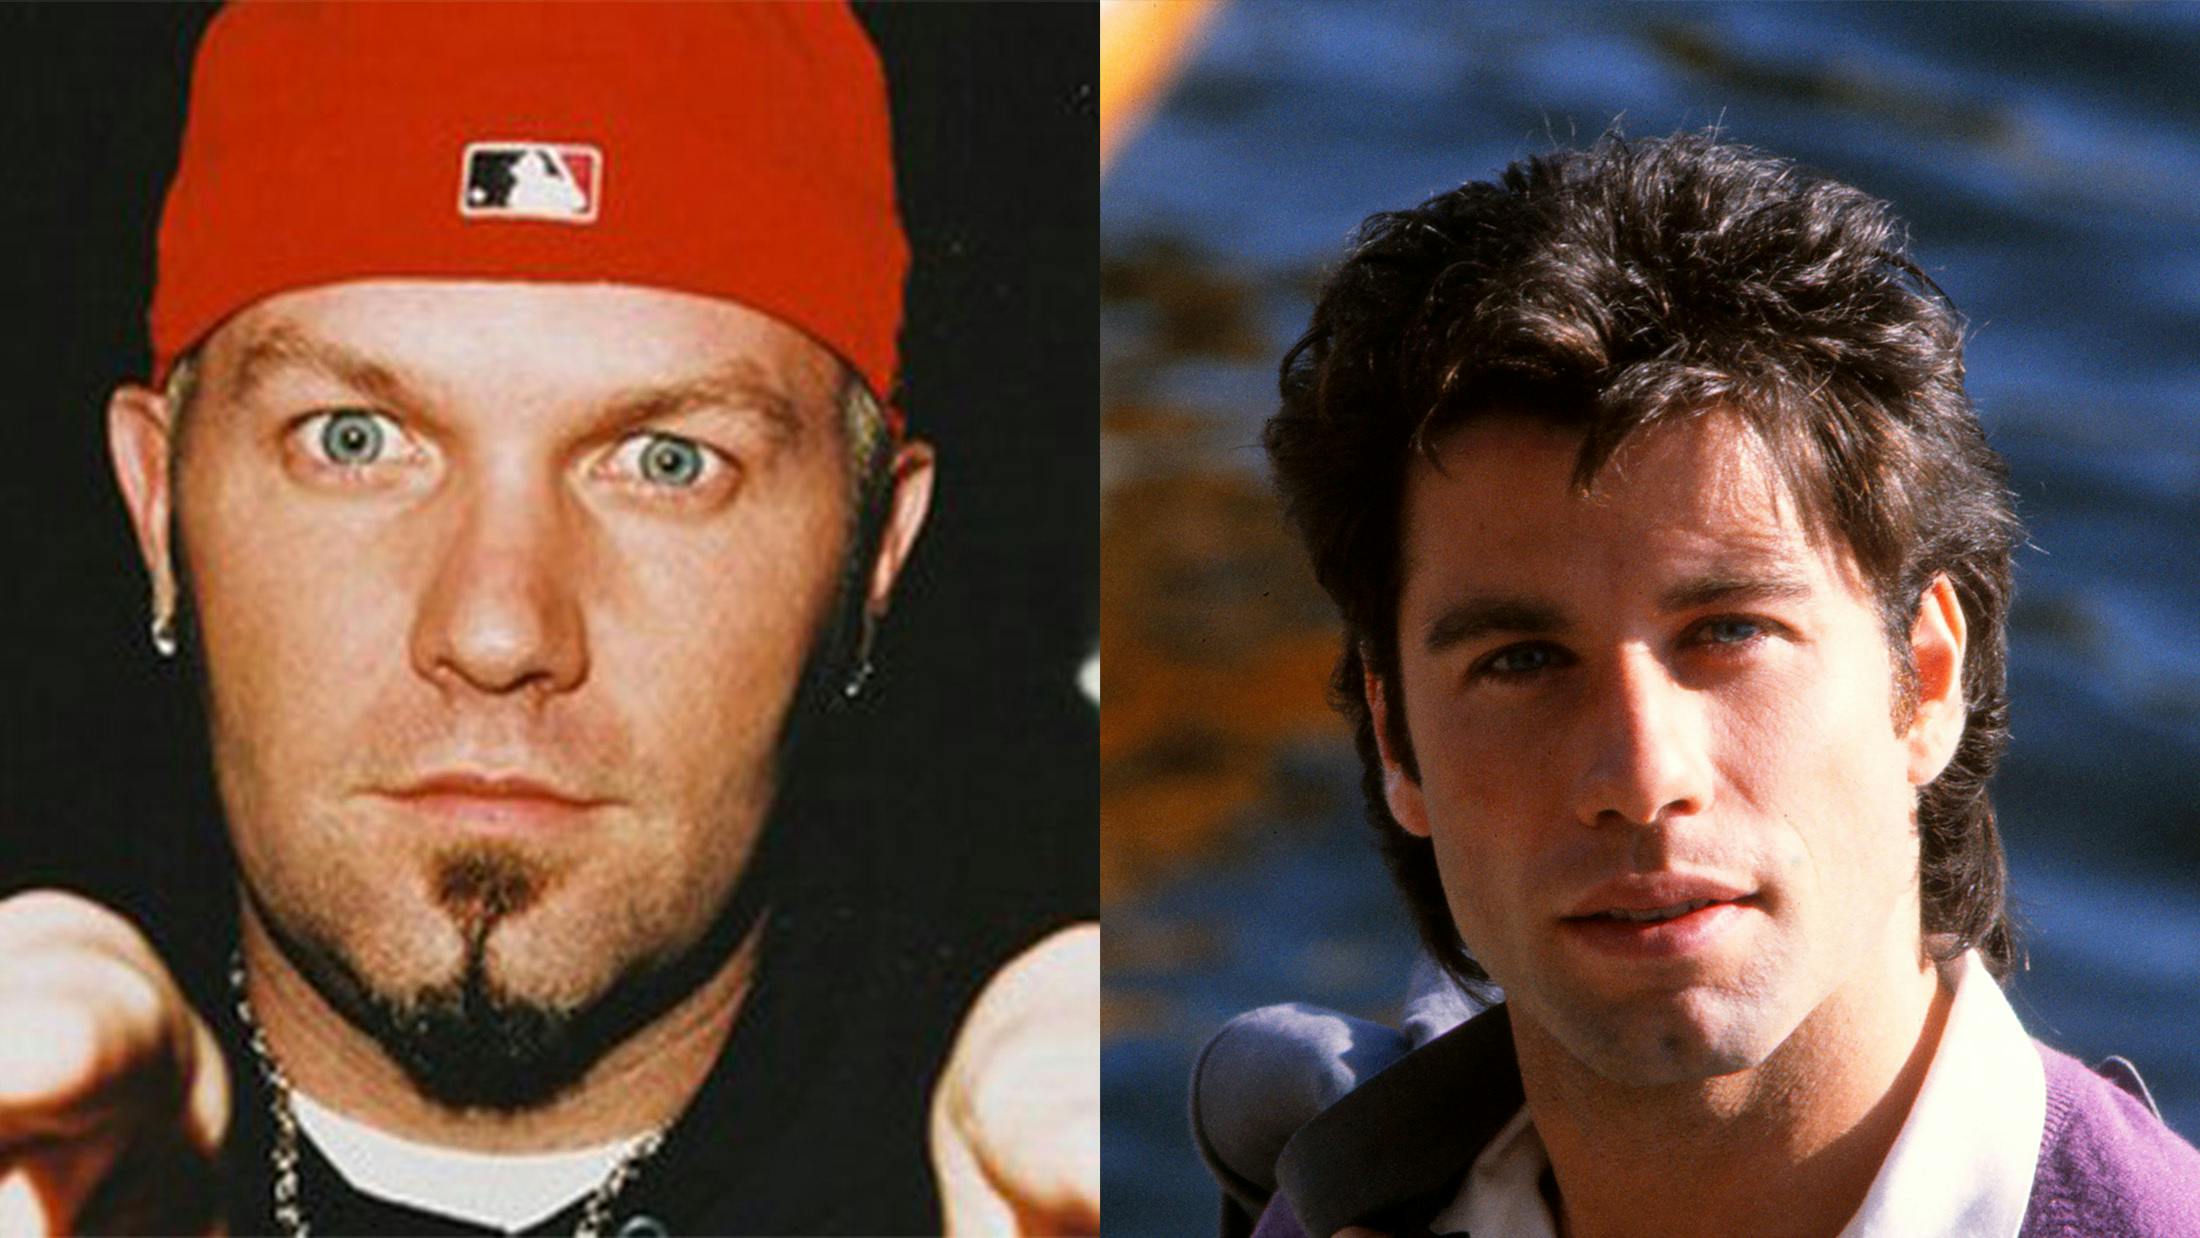 Here's A Look At John Travolta In Fred Durst's New Movie